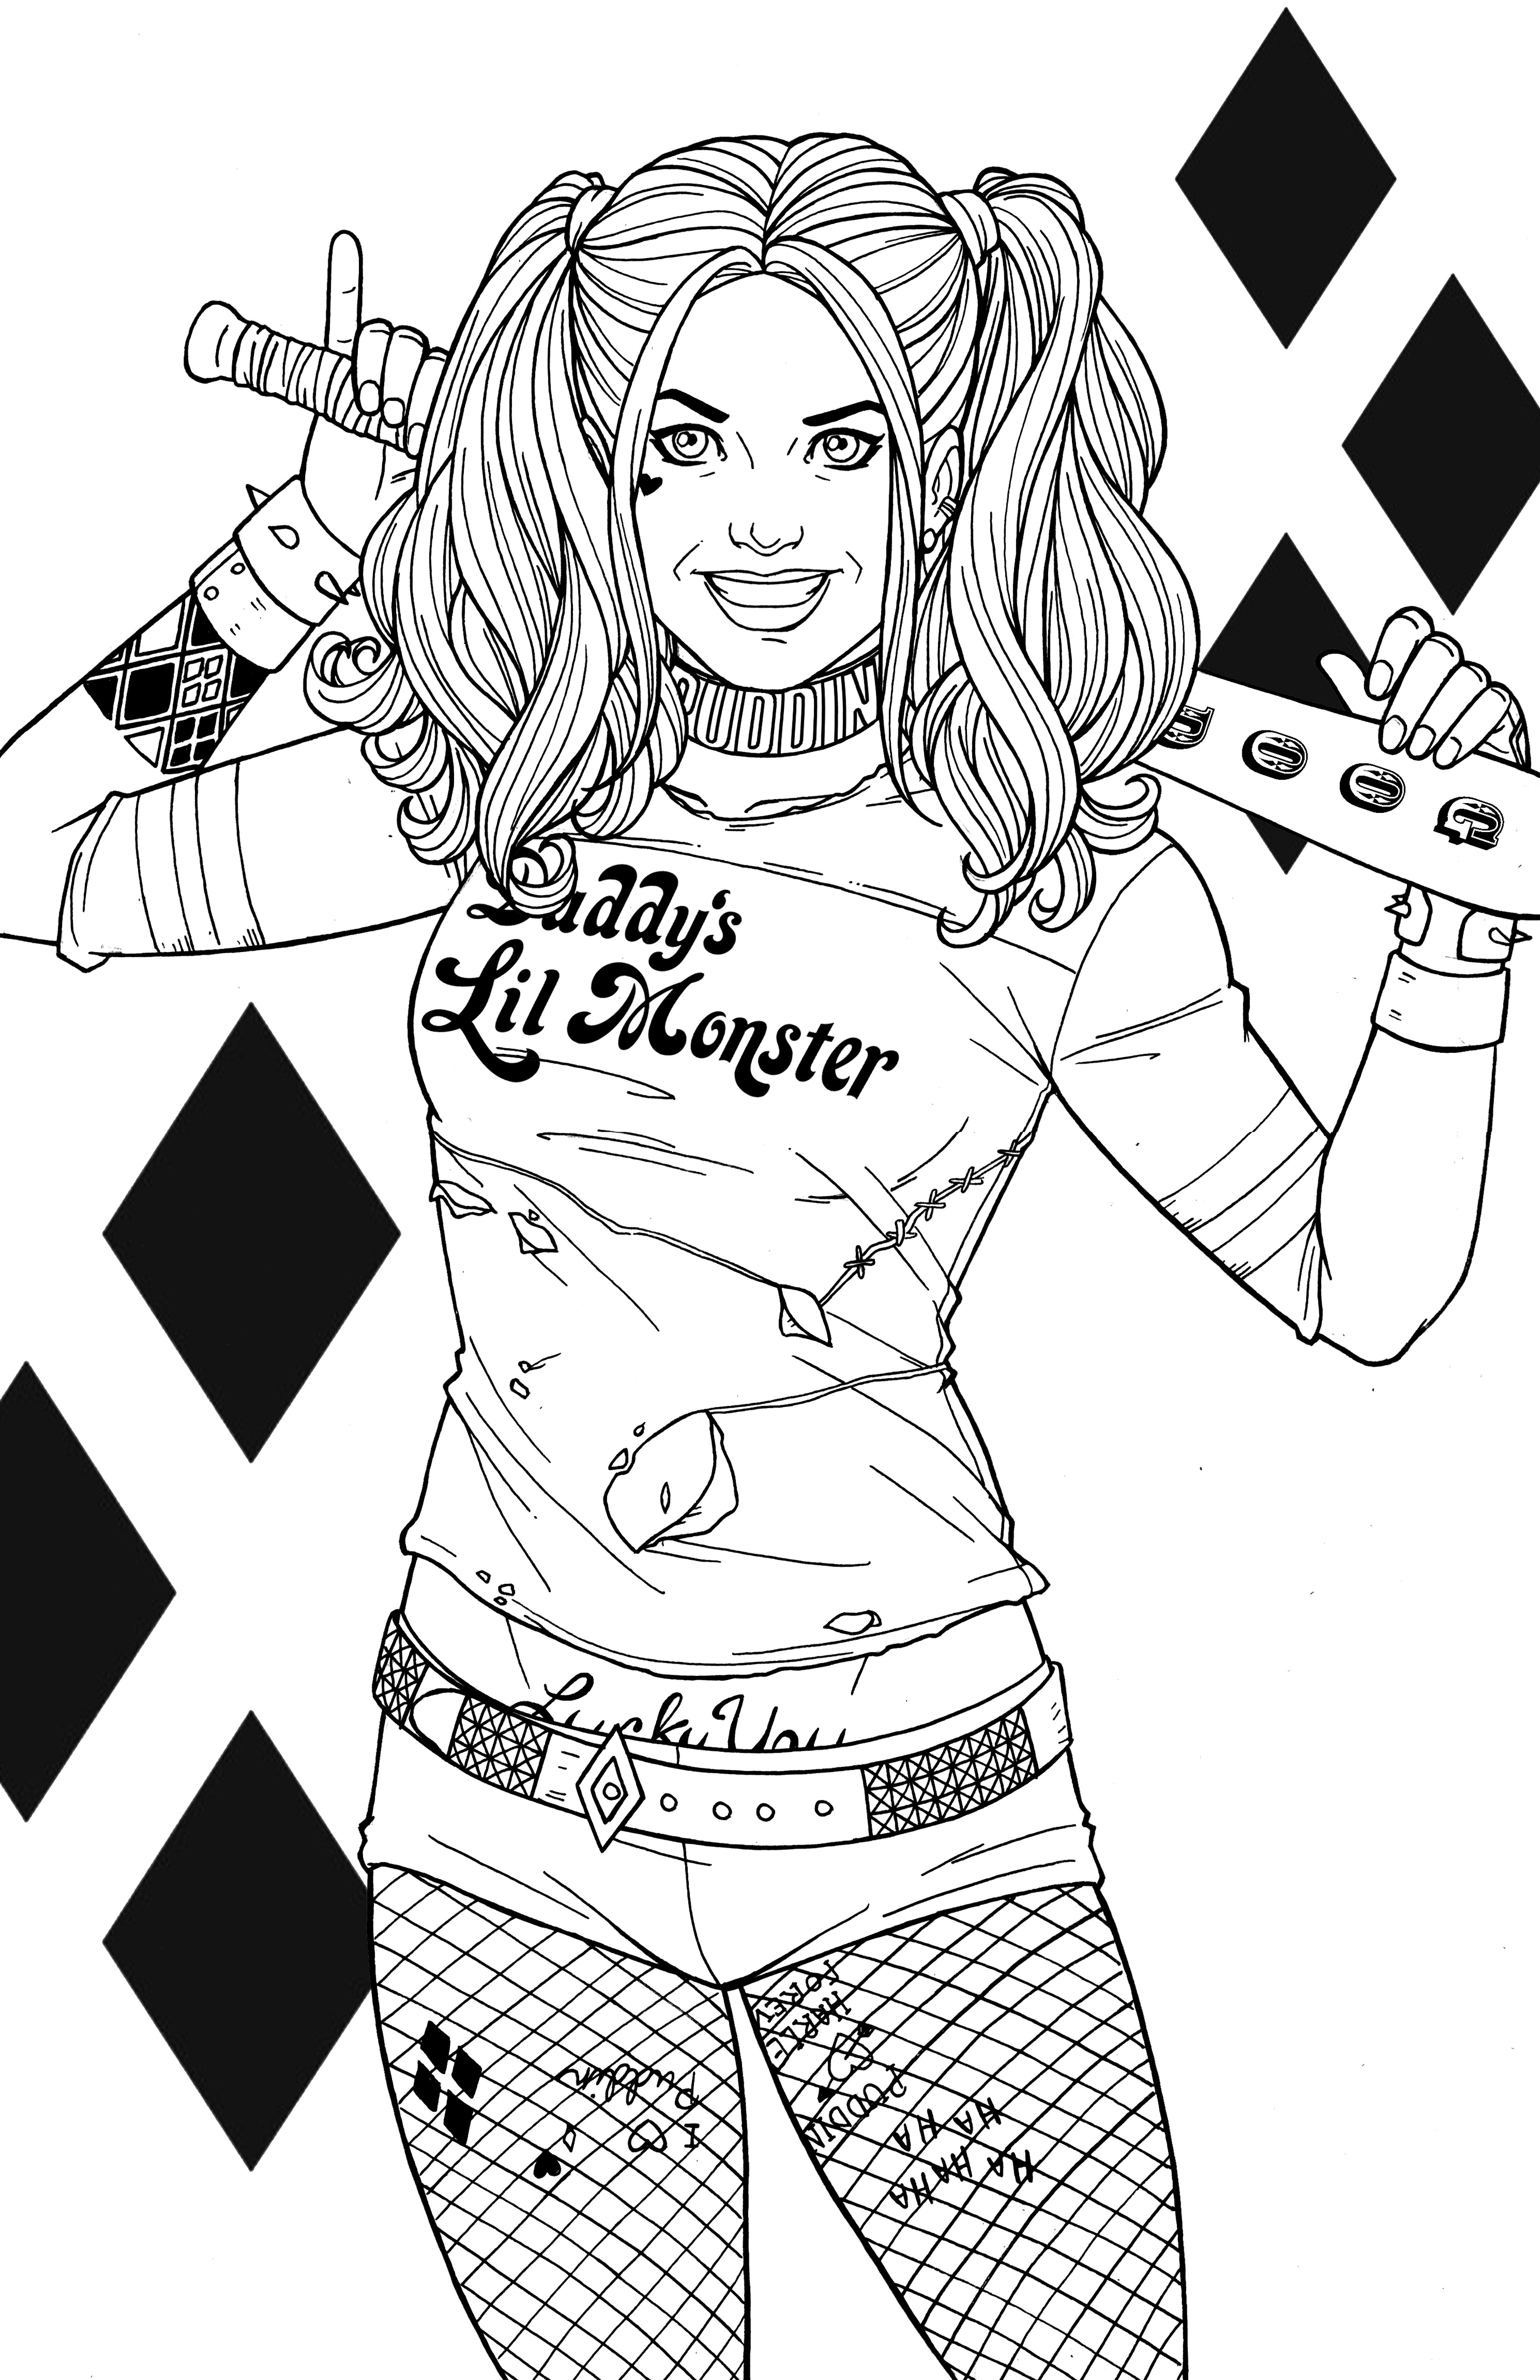 Harley Quinn Coloring Pages To Print Images Of Harley Quinn Coloring Pages For Adults Sabadaphnecottage